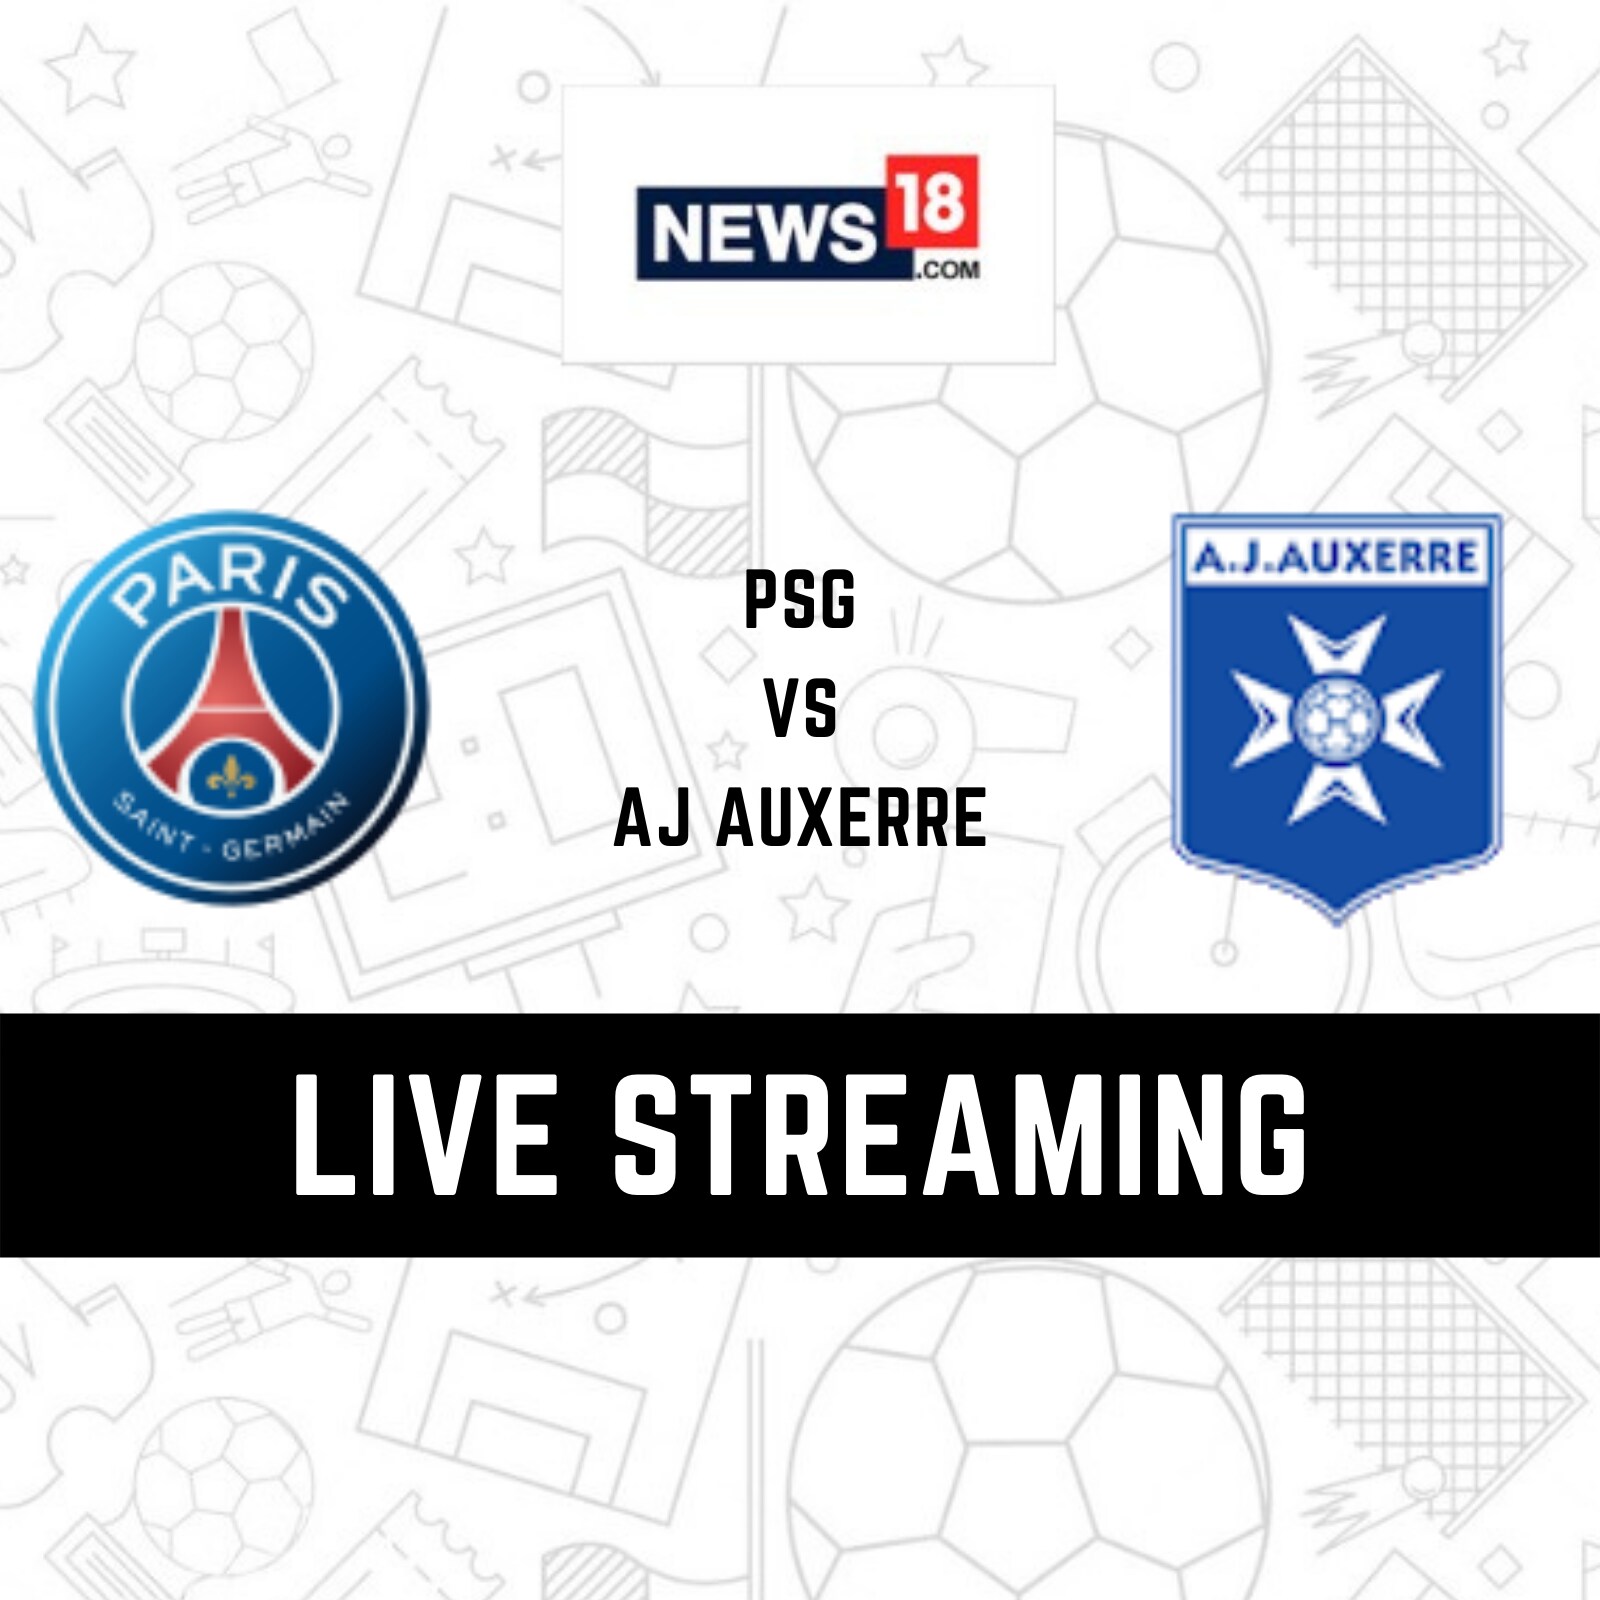 Paris Saint-Germain vs AJ Auxerre Live Streaming When and Where to Watch Ligue 1 2022-23 Live Coverage on Live TV Online